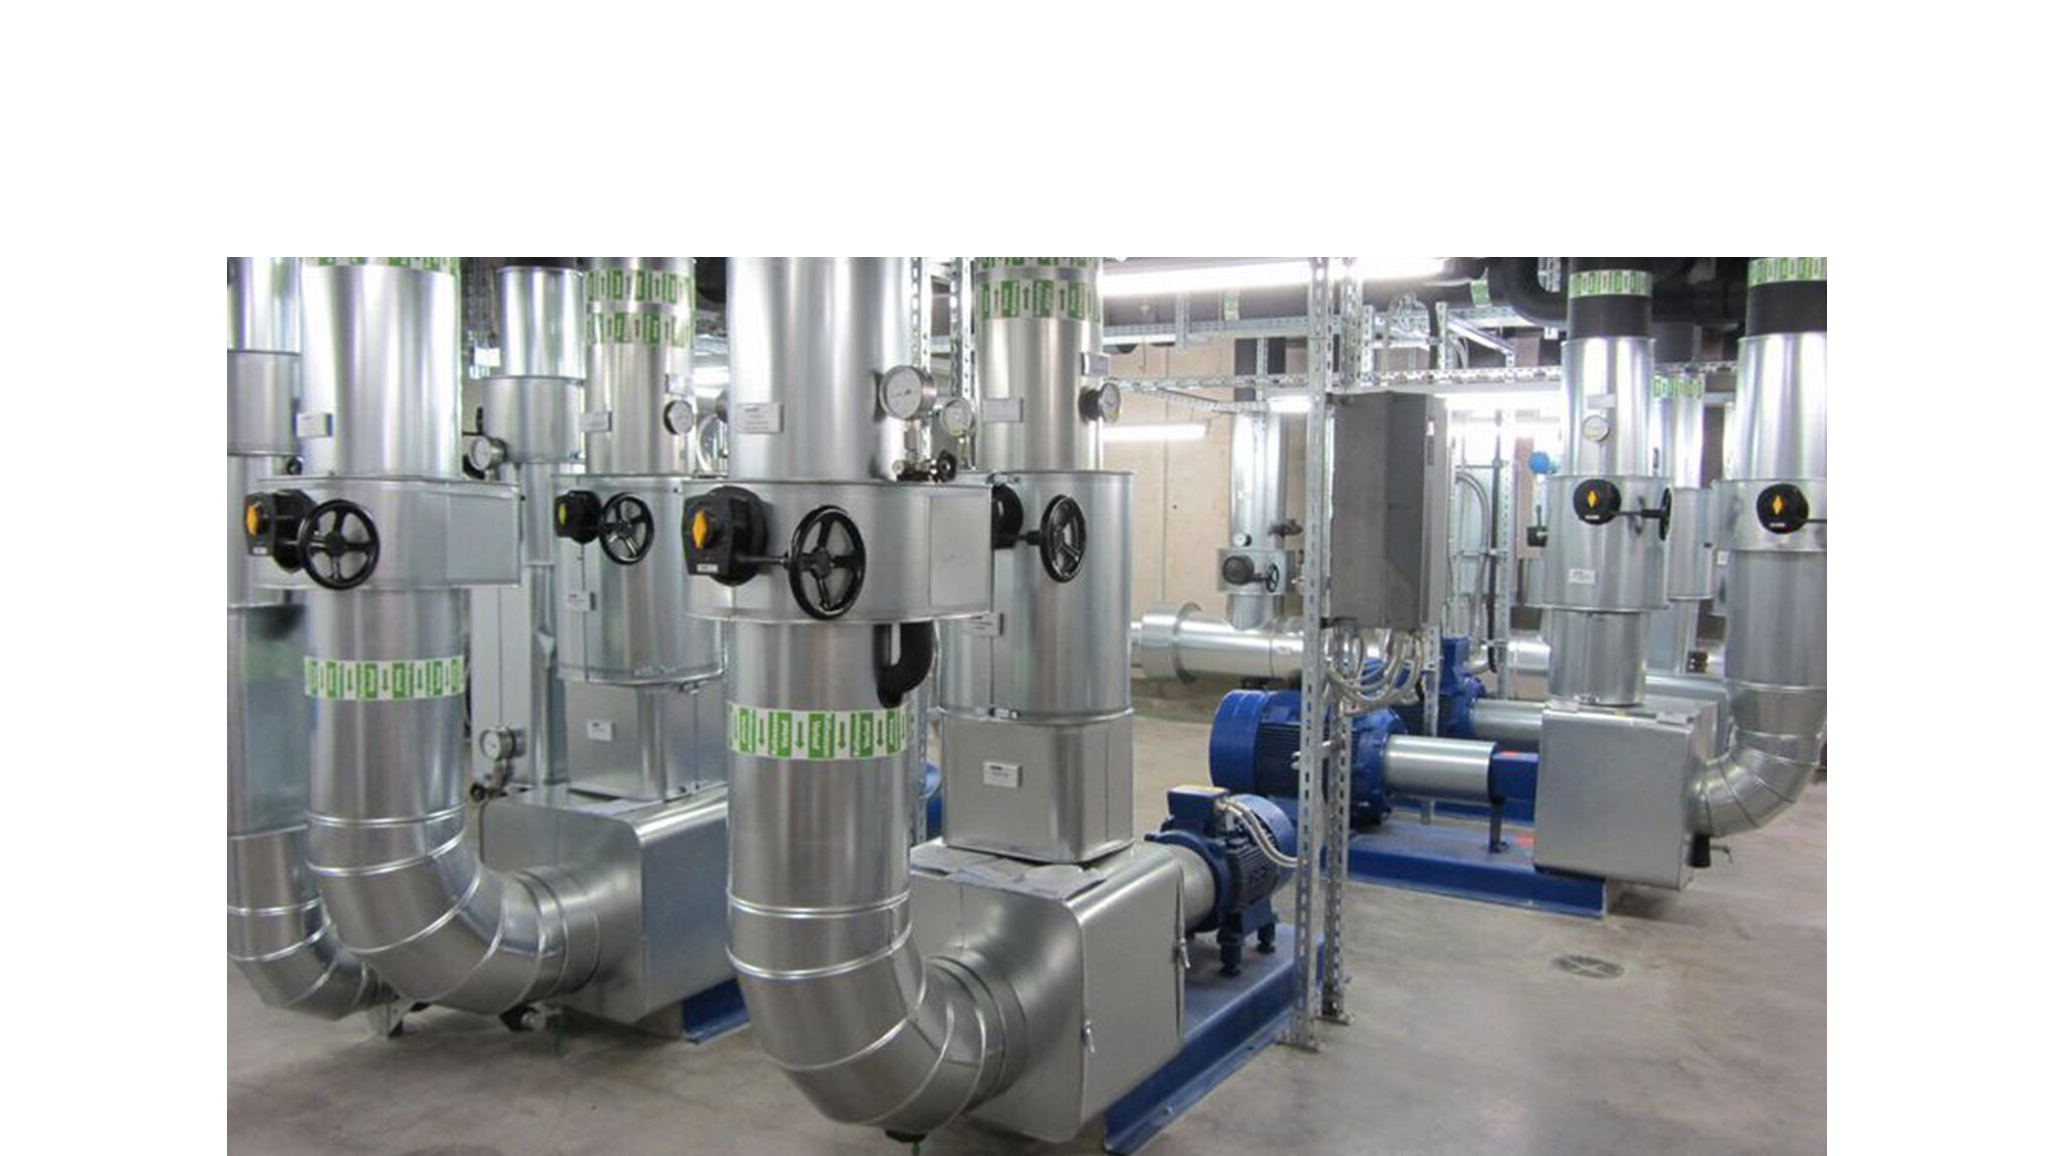 Photo of cooling machinery at HLRS